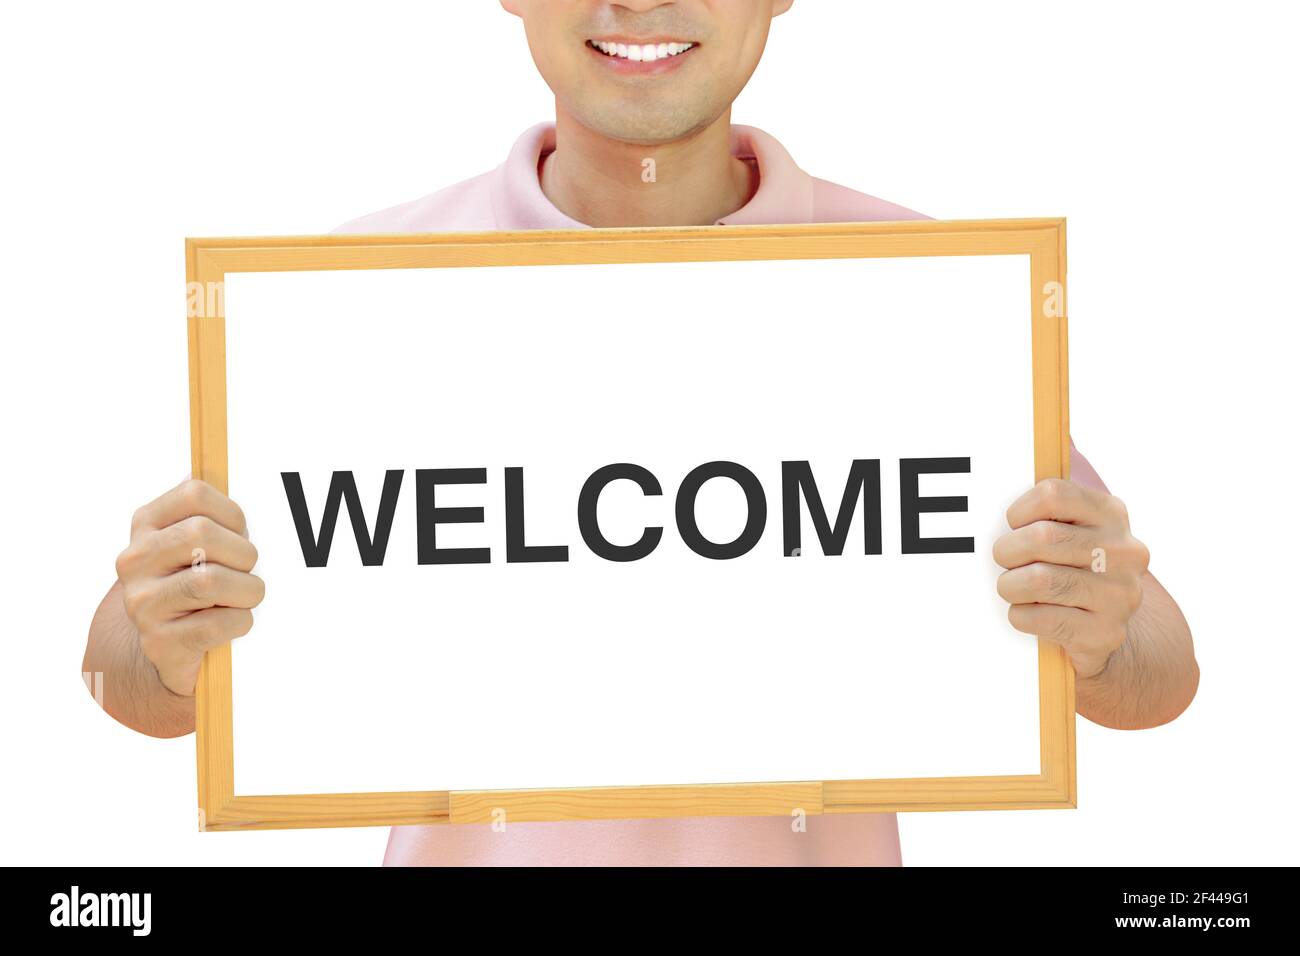 WELCOME sign on whiteboard held by smiling man Stock Photo